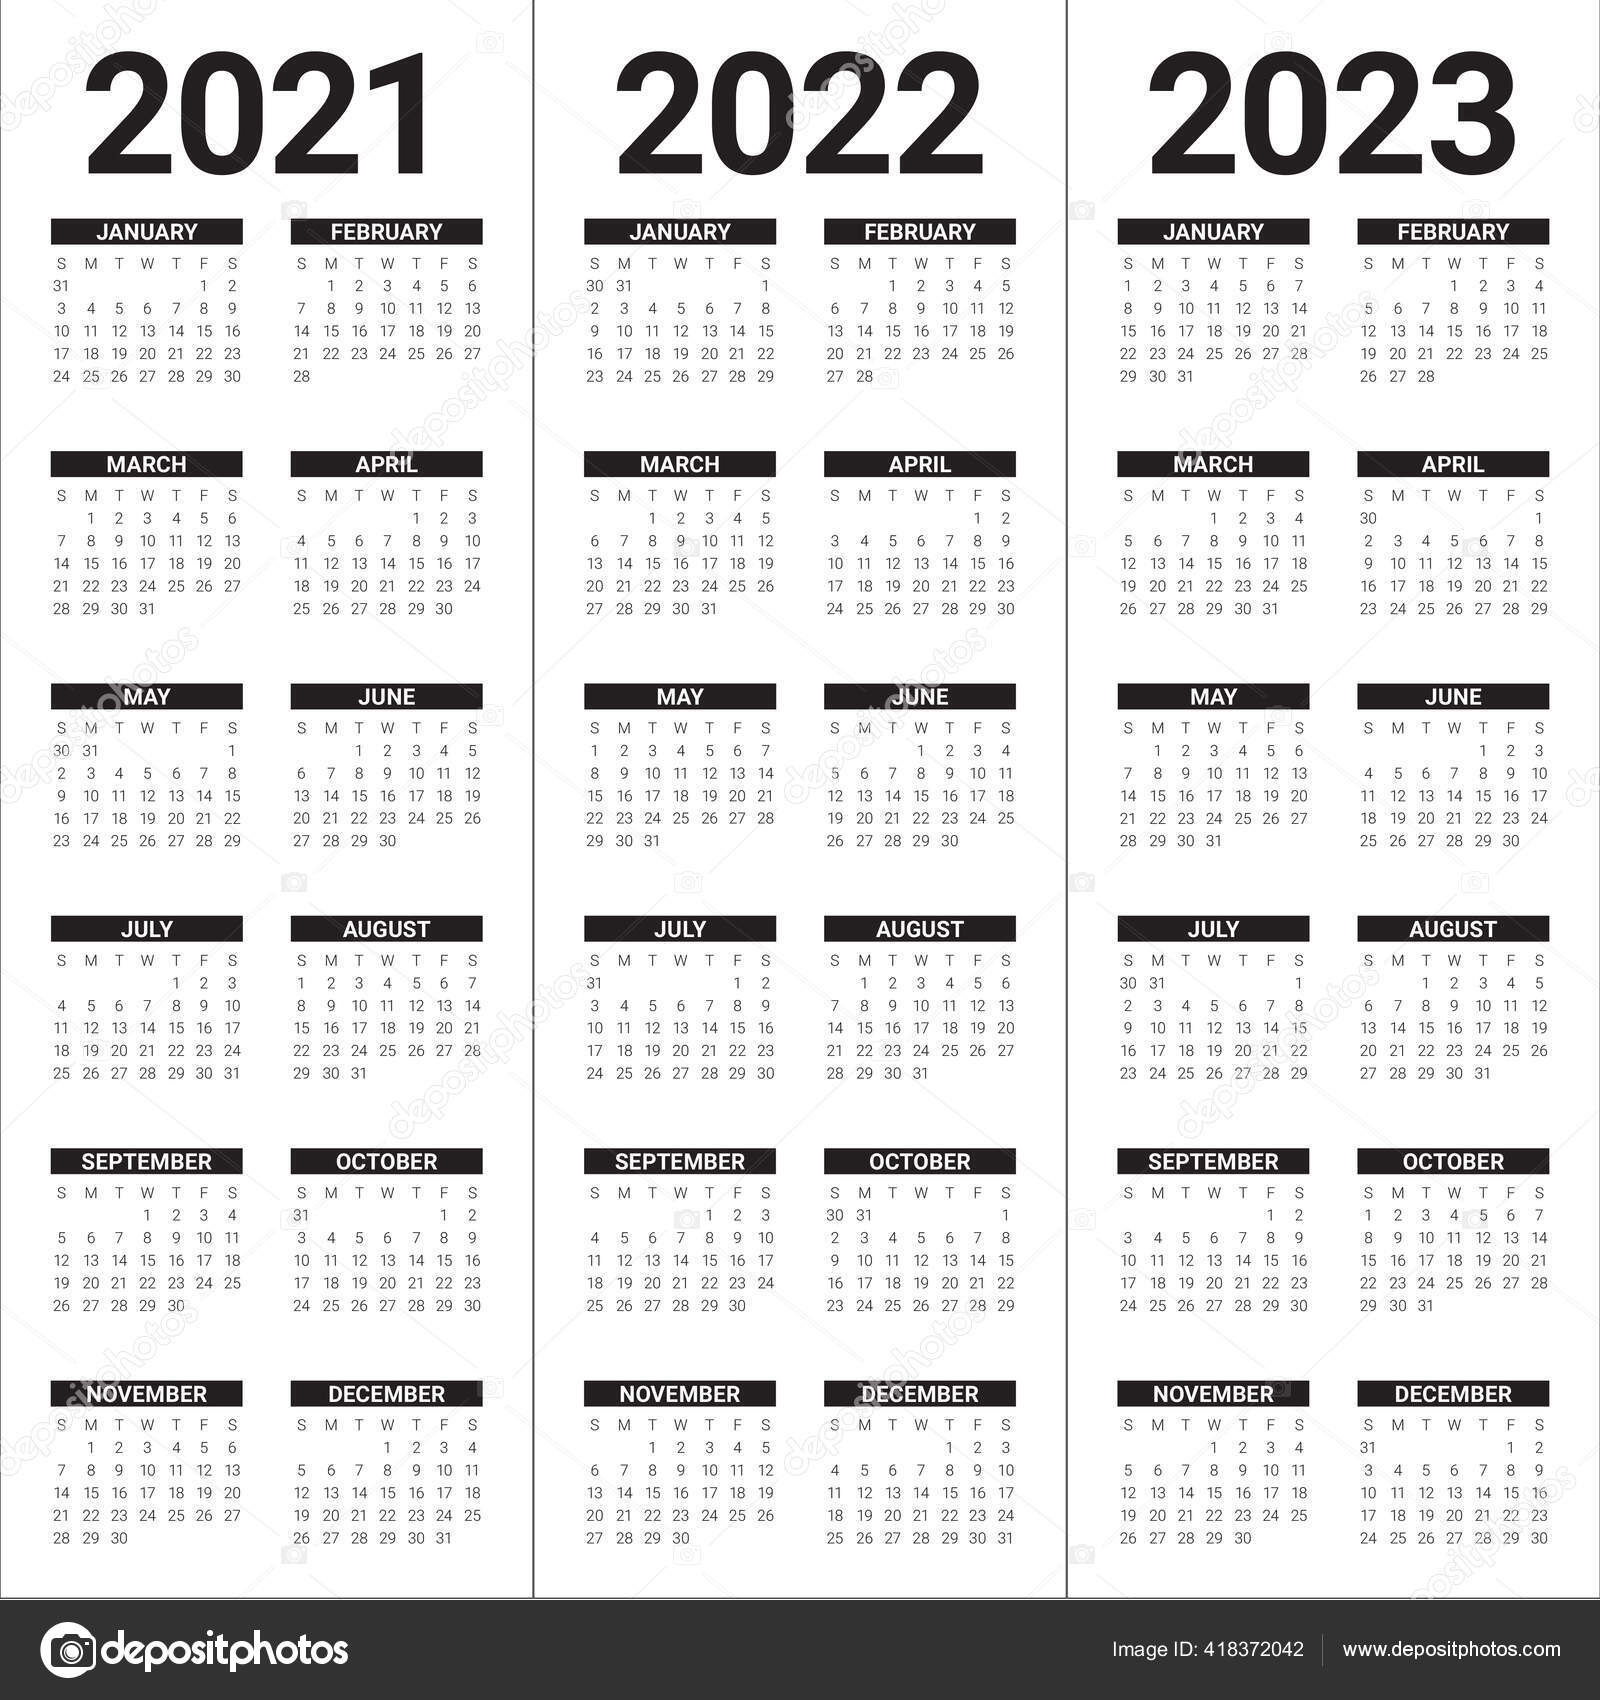 Ucsb 2022 2023 Calendar Year 2021 2022 2023 Calendar Vector Design Template Simple Clean Stock  Vector Image By ©Dolphfynlow #418372042